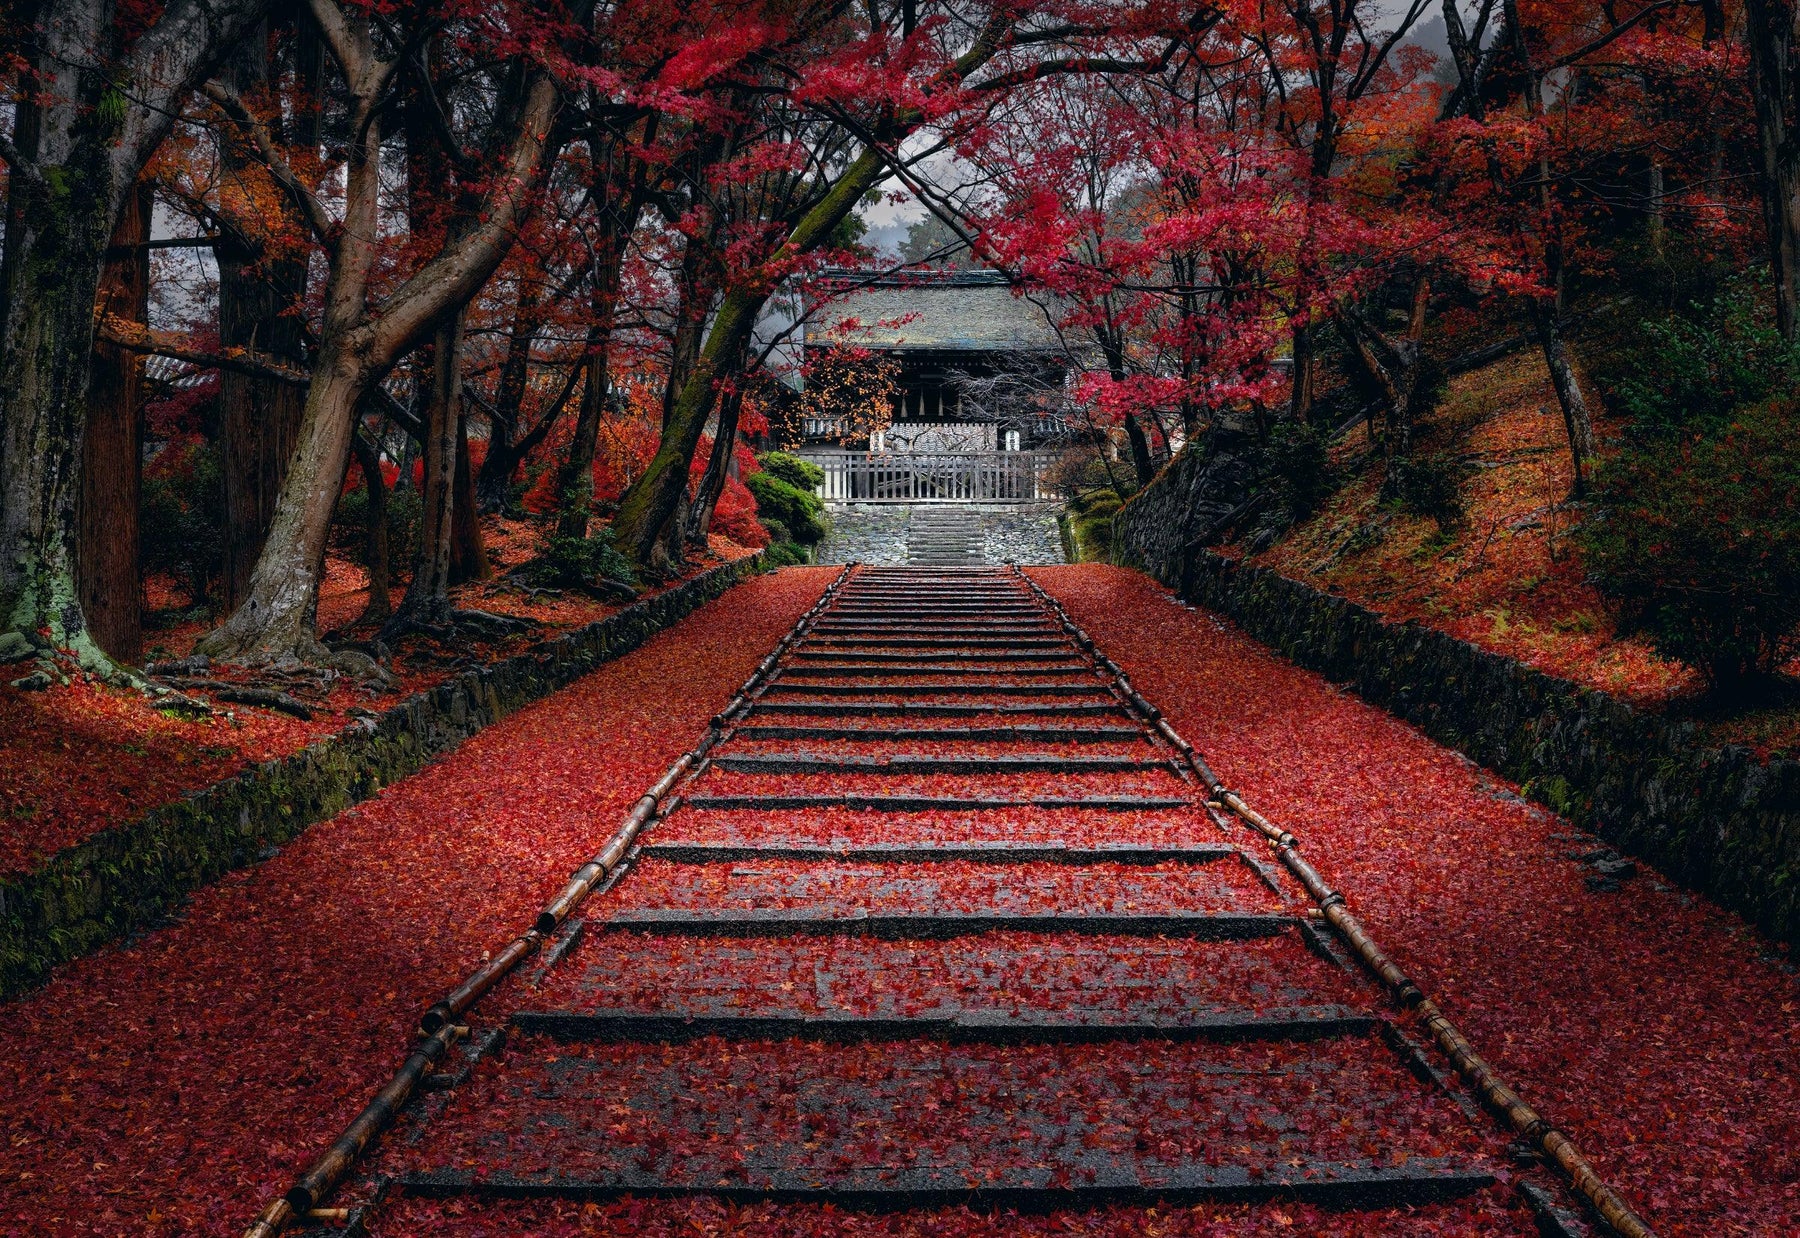 Stone path with red leaves surrounded by Autumn trees leading up to a Temple